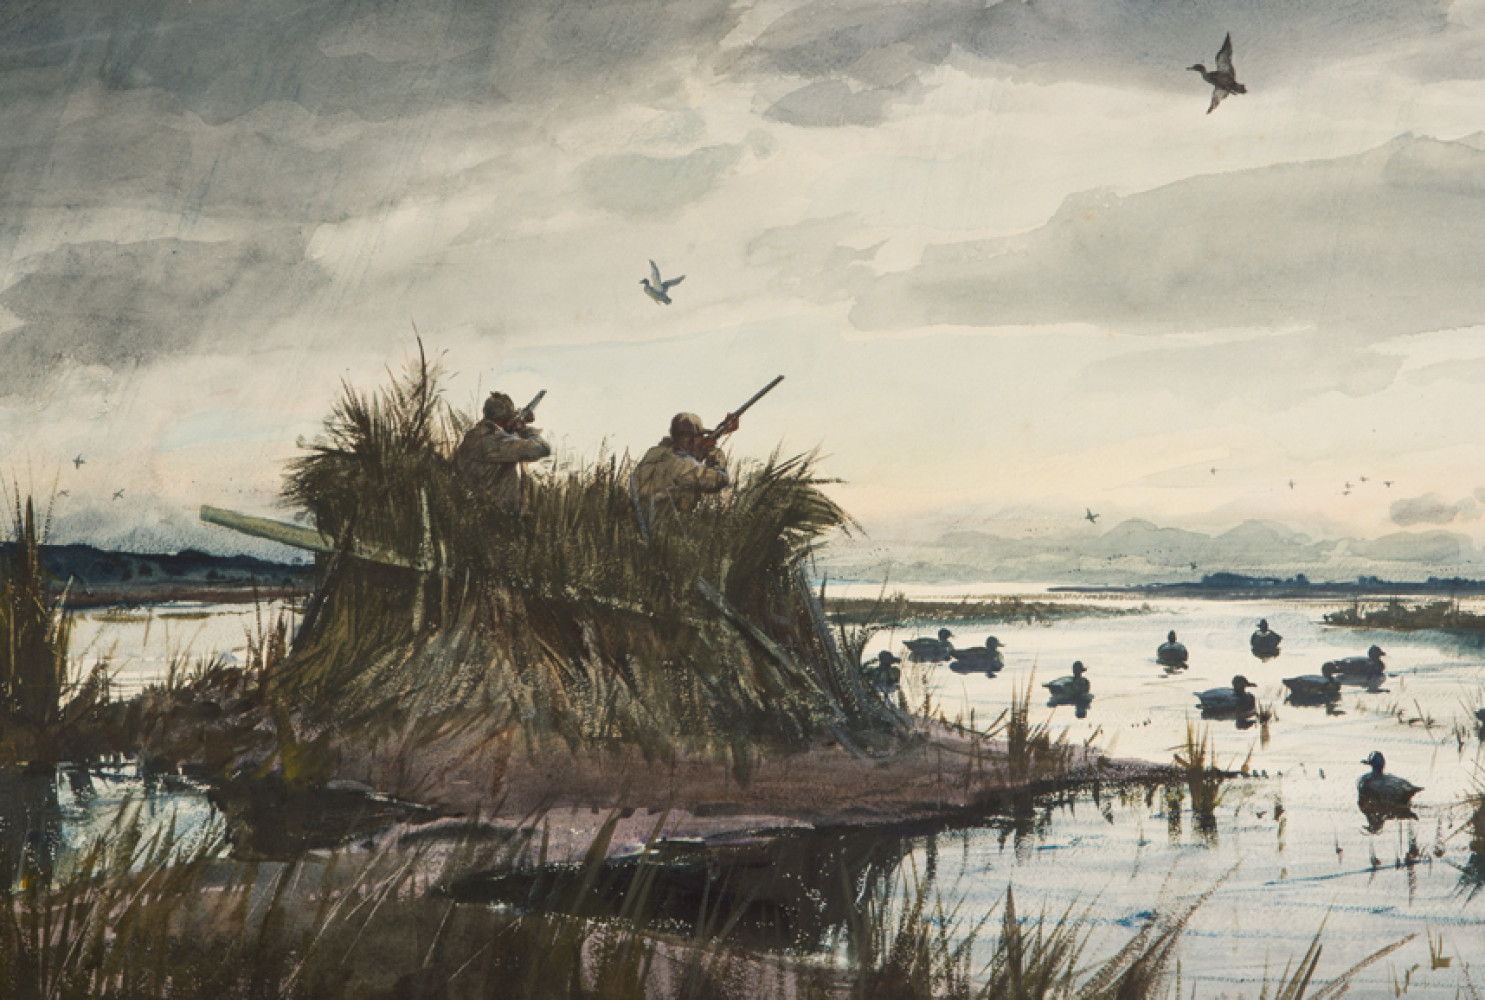 Duck Shooting, 1959, by Ogden M. Pleissner (American, 1905—1983); Watercolor on paper, 21 3/4 x 33 inches; Collection of Shelburne Museum, gift of Morton Quantrell; 1996-42.19; Photograph by Andy Duback